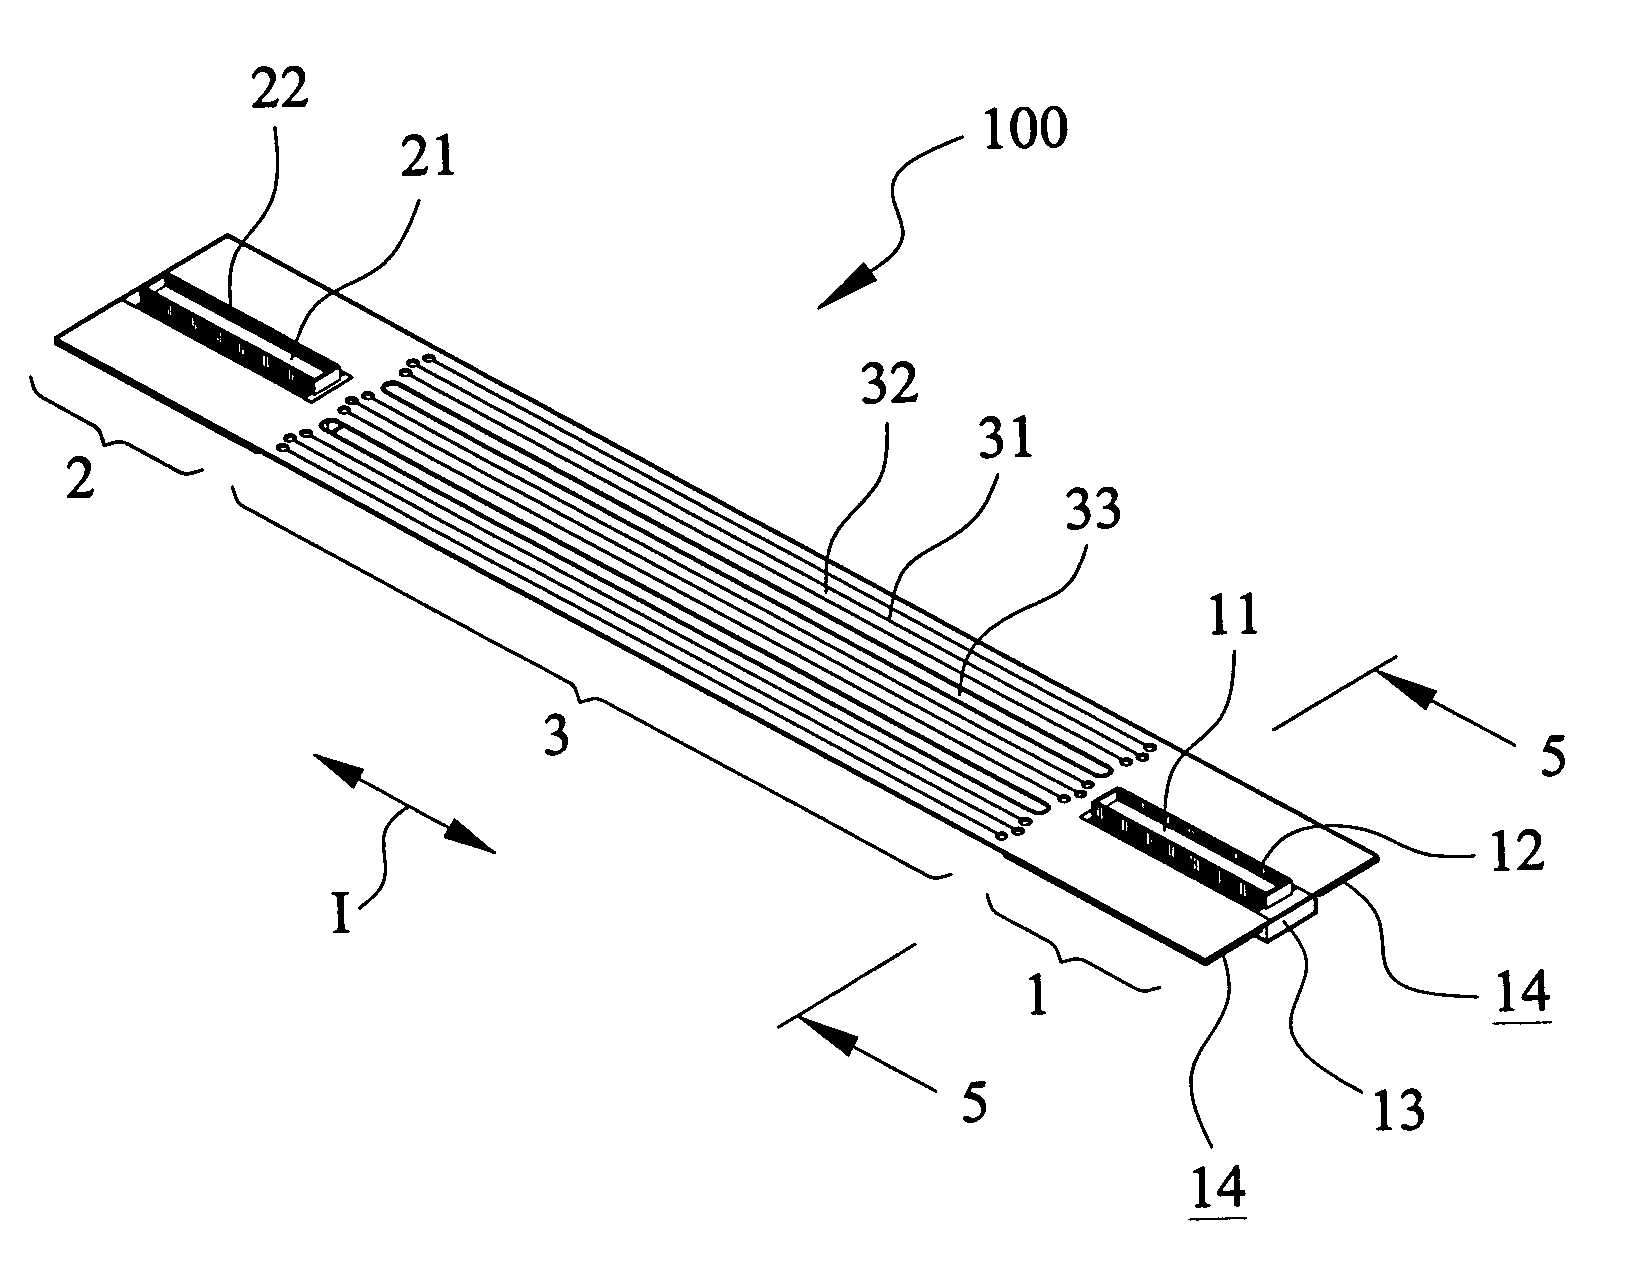 Signal transmission cable adapted to pass through hinge assembly